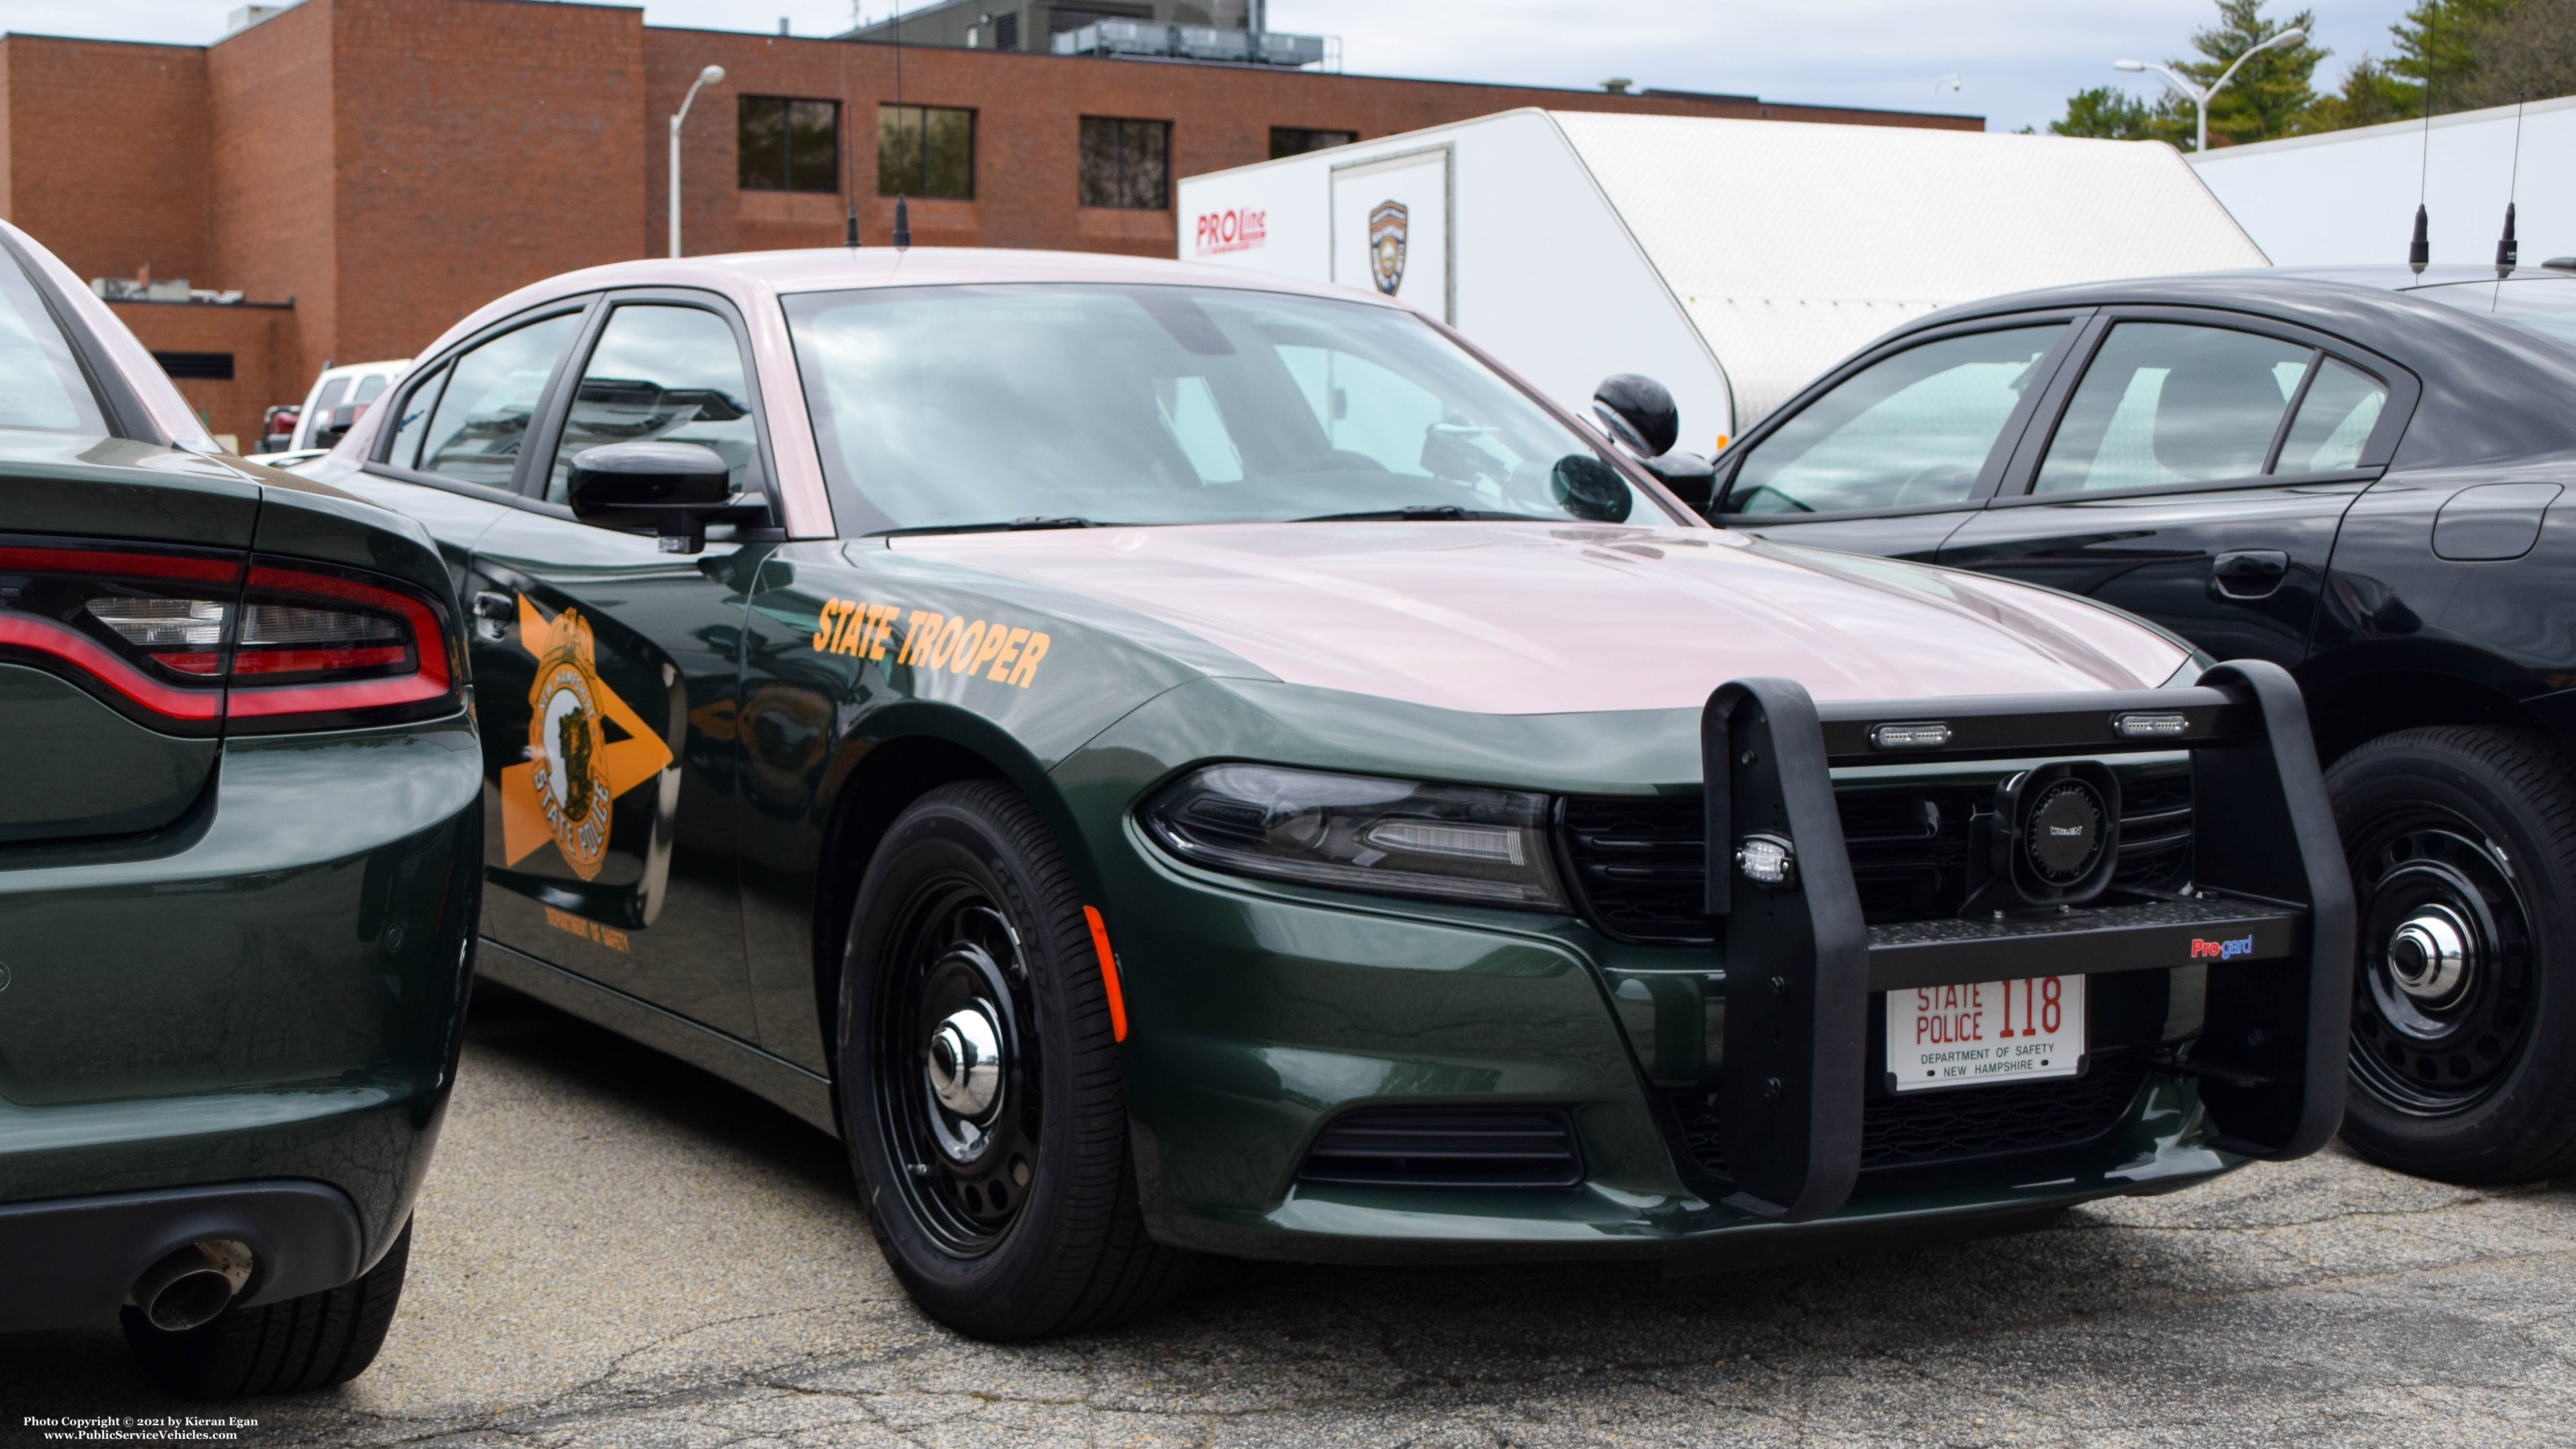 A photo  of New Hampshire State Police
            Cruiser 118, a 2020 Dodge Charger             taken by Kieran Egan